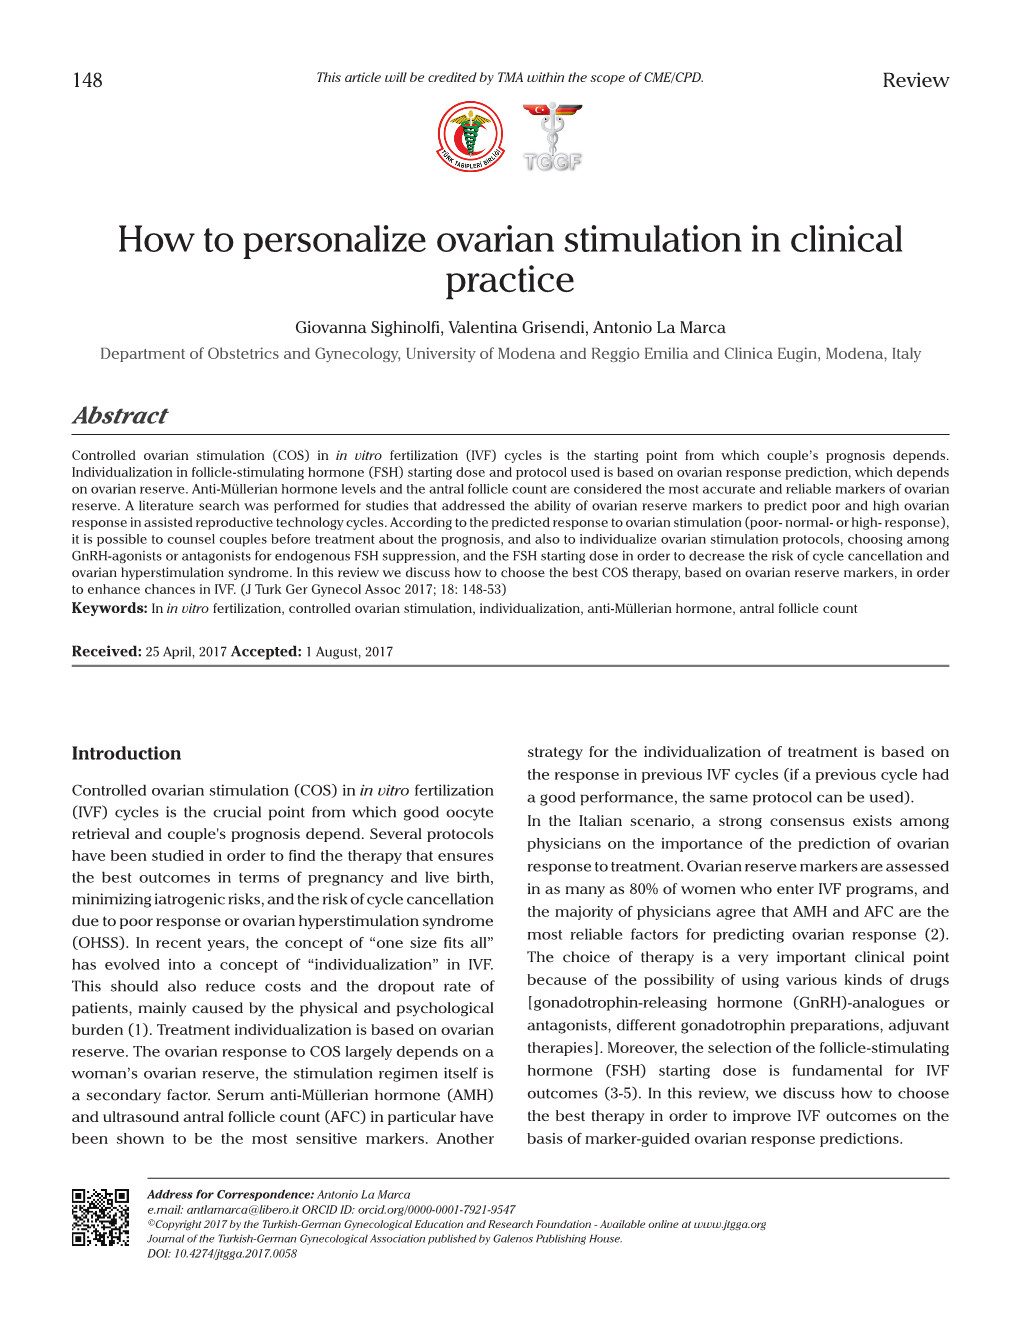 How to Personalize Ovarian Stimulation in Clinical Practice